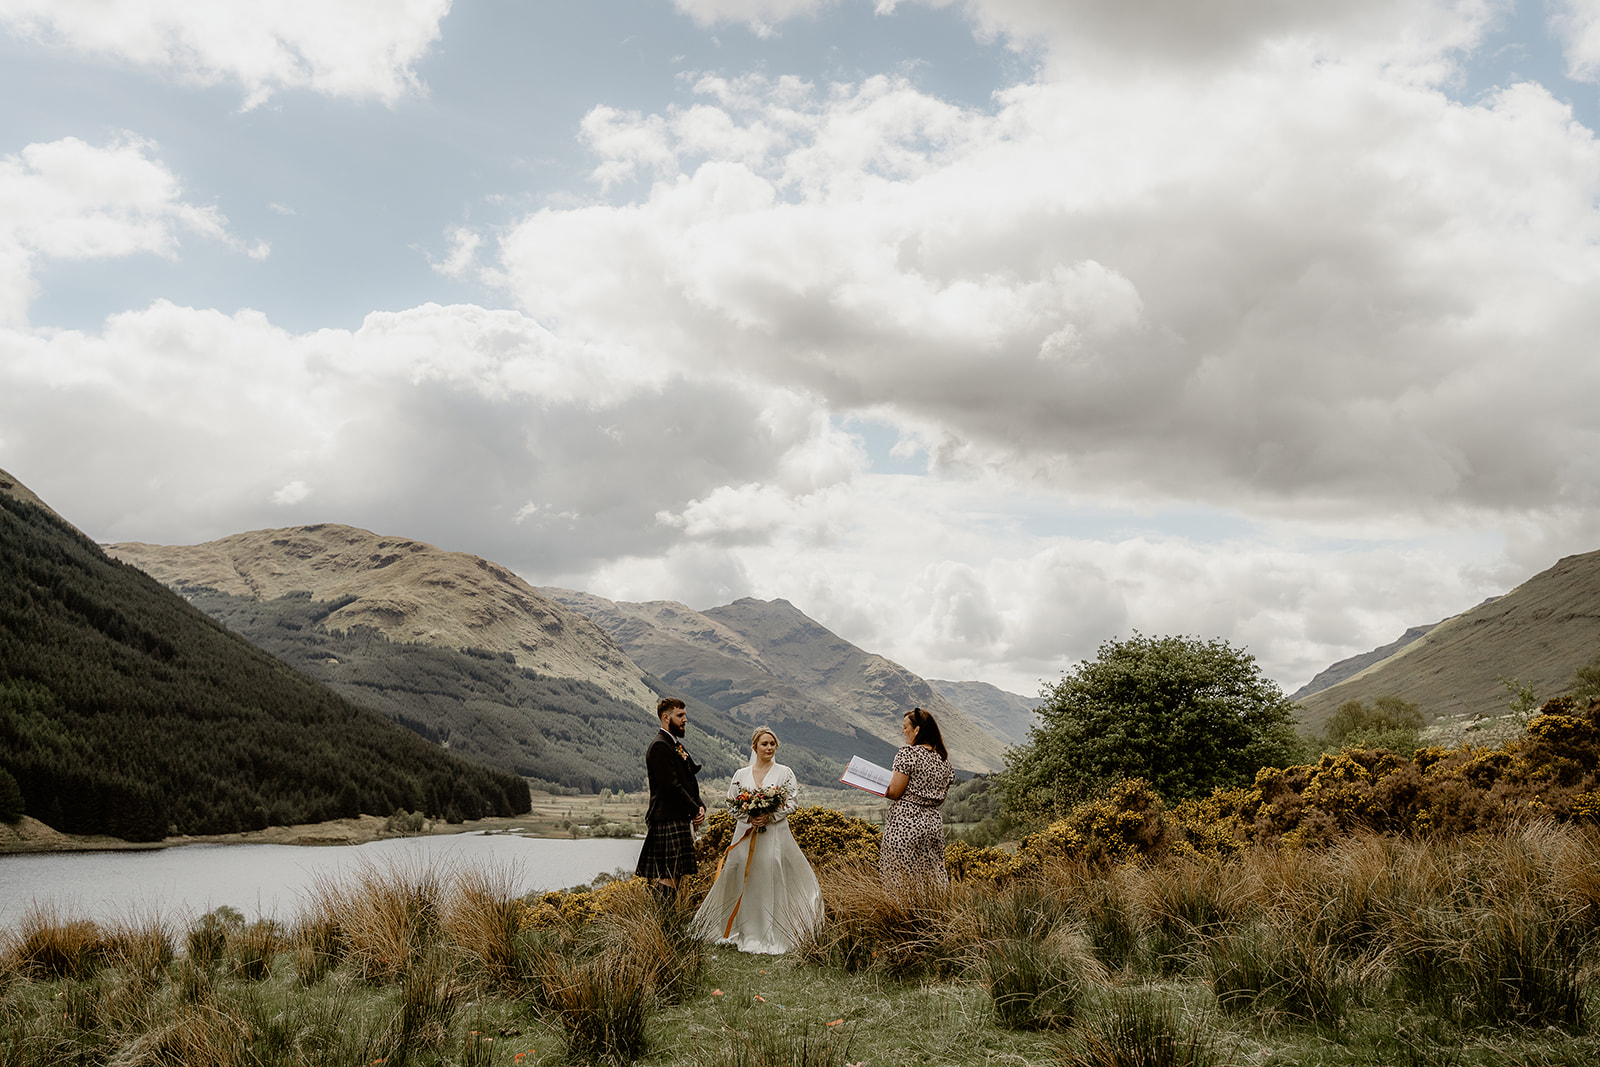 monchyle mhor elopement on the banks of loch voil. Humanist ceremony with mountains and loch in the background.